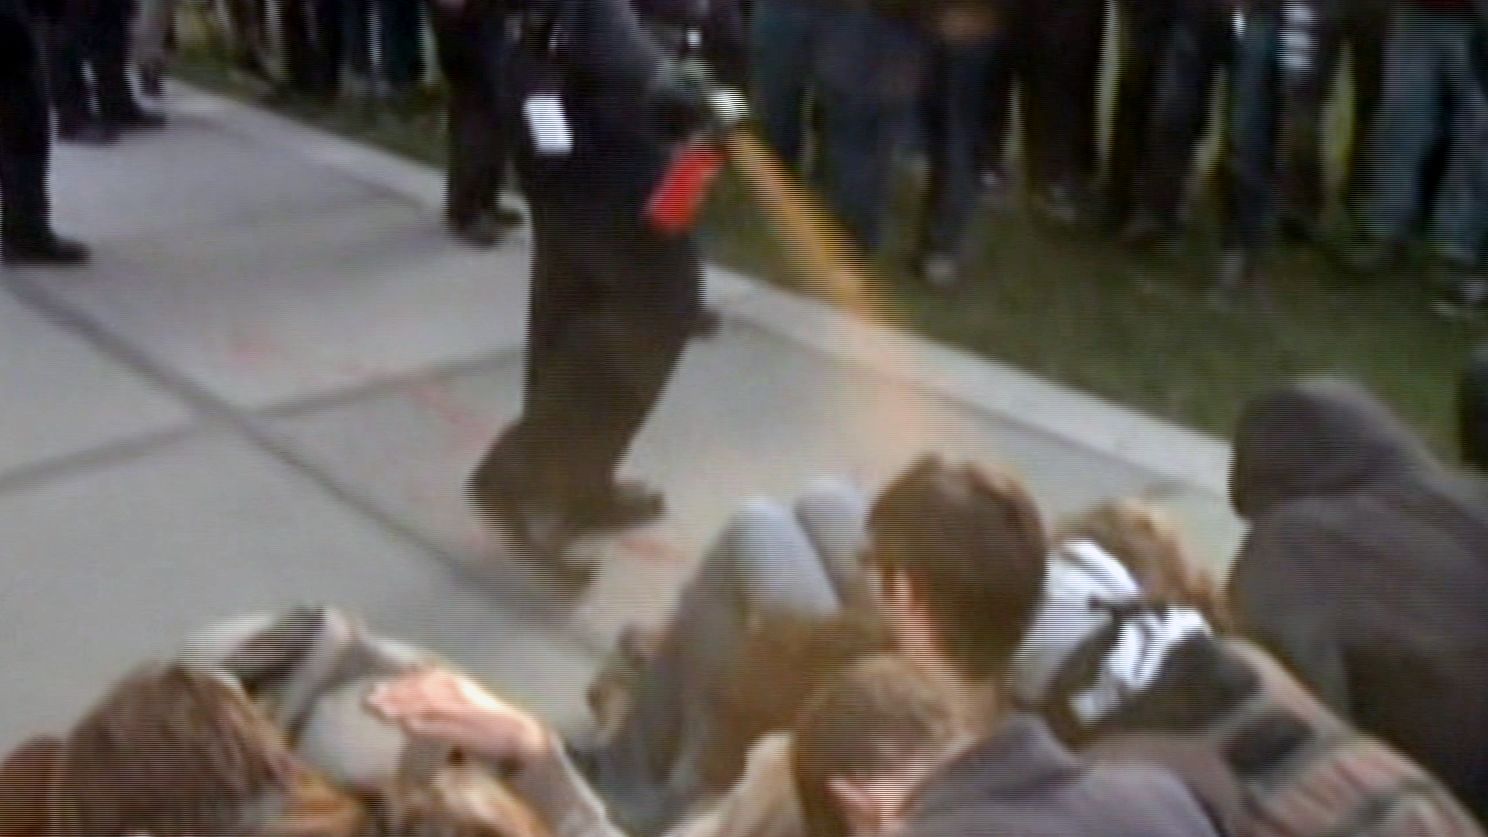 Video of Lt. John Pike spraying students at close range in November 2011 went viral on the Internet.